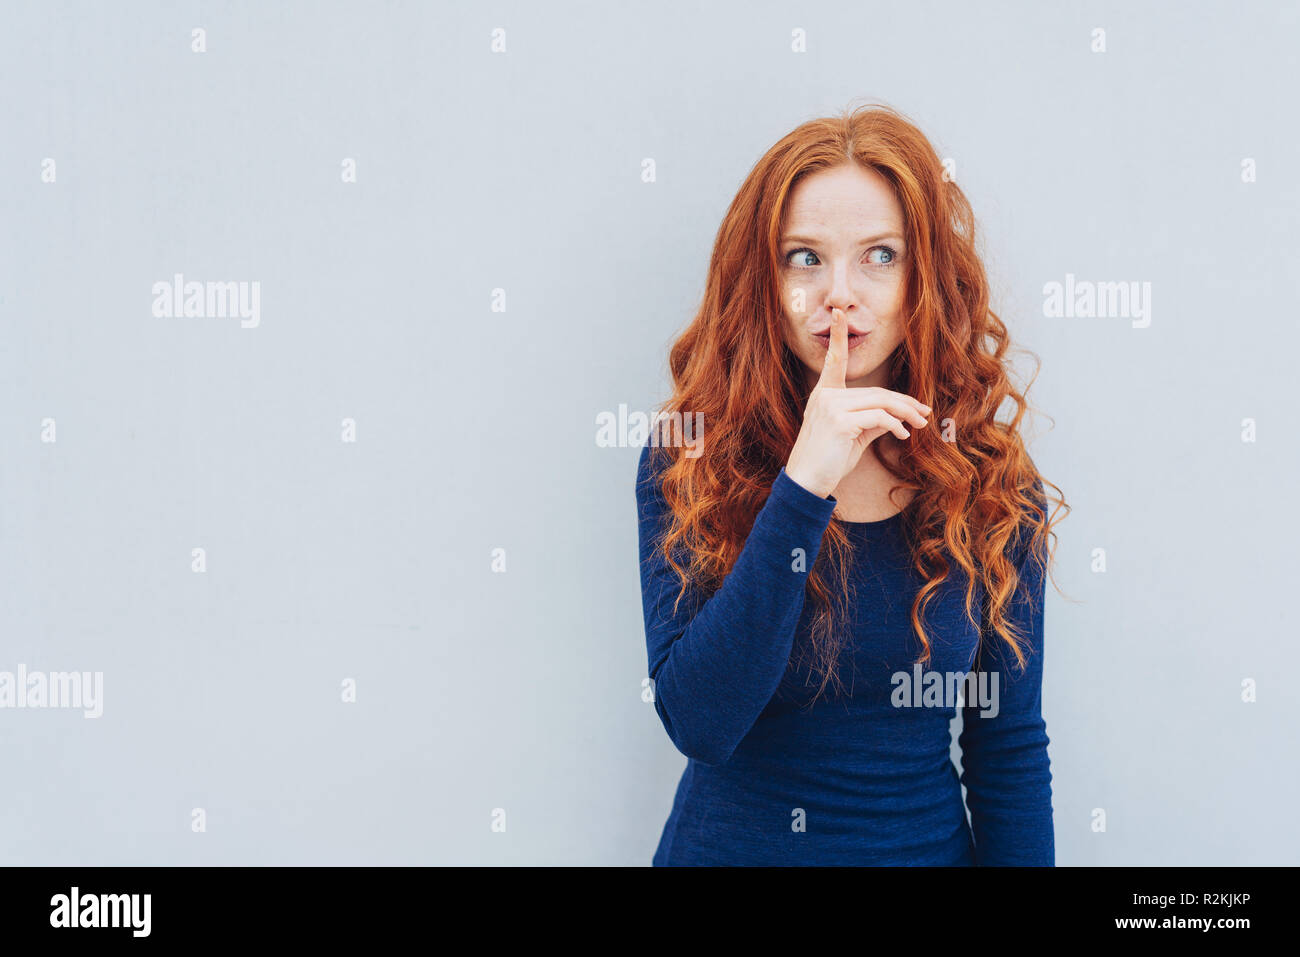 Secretive young woman making a hushing gesture with her finger to her lips as she glances to the side against a white exterior wall with copy space Stock Photo